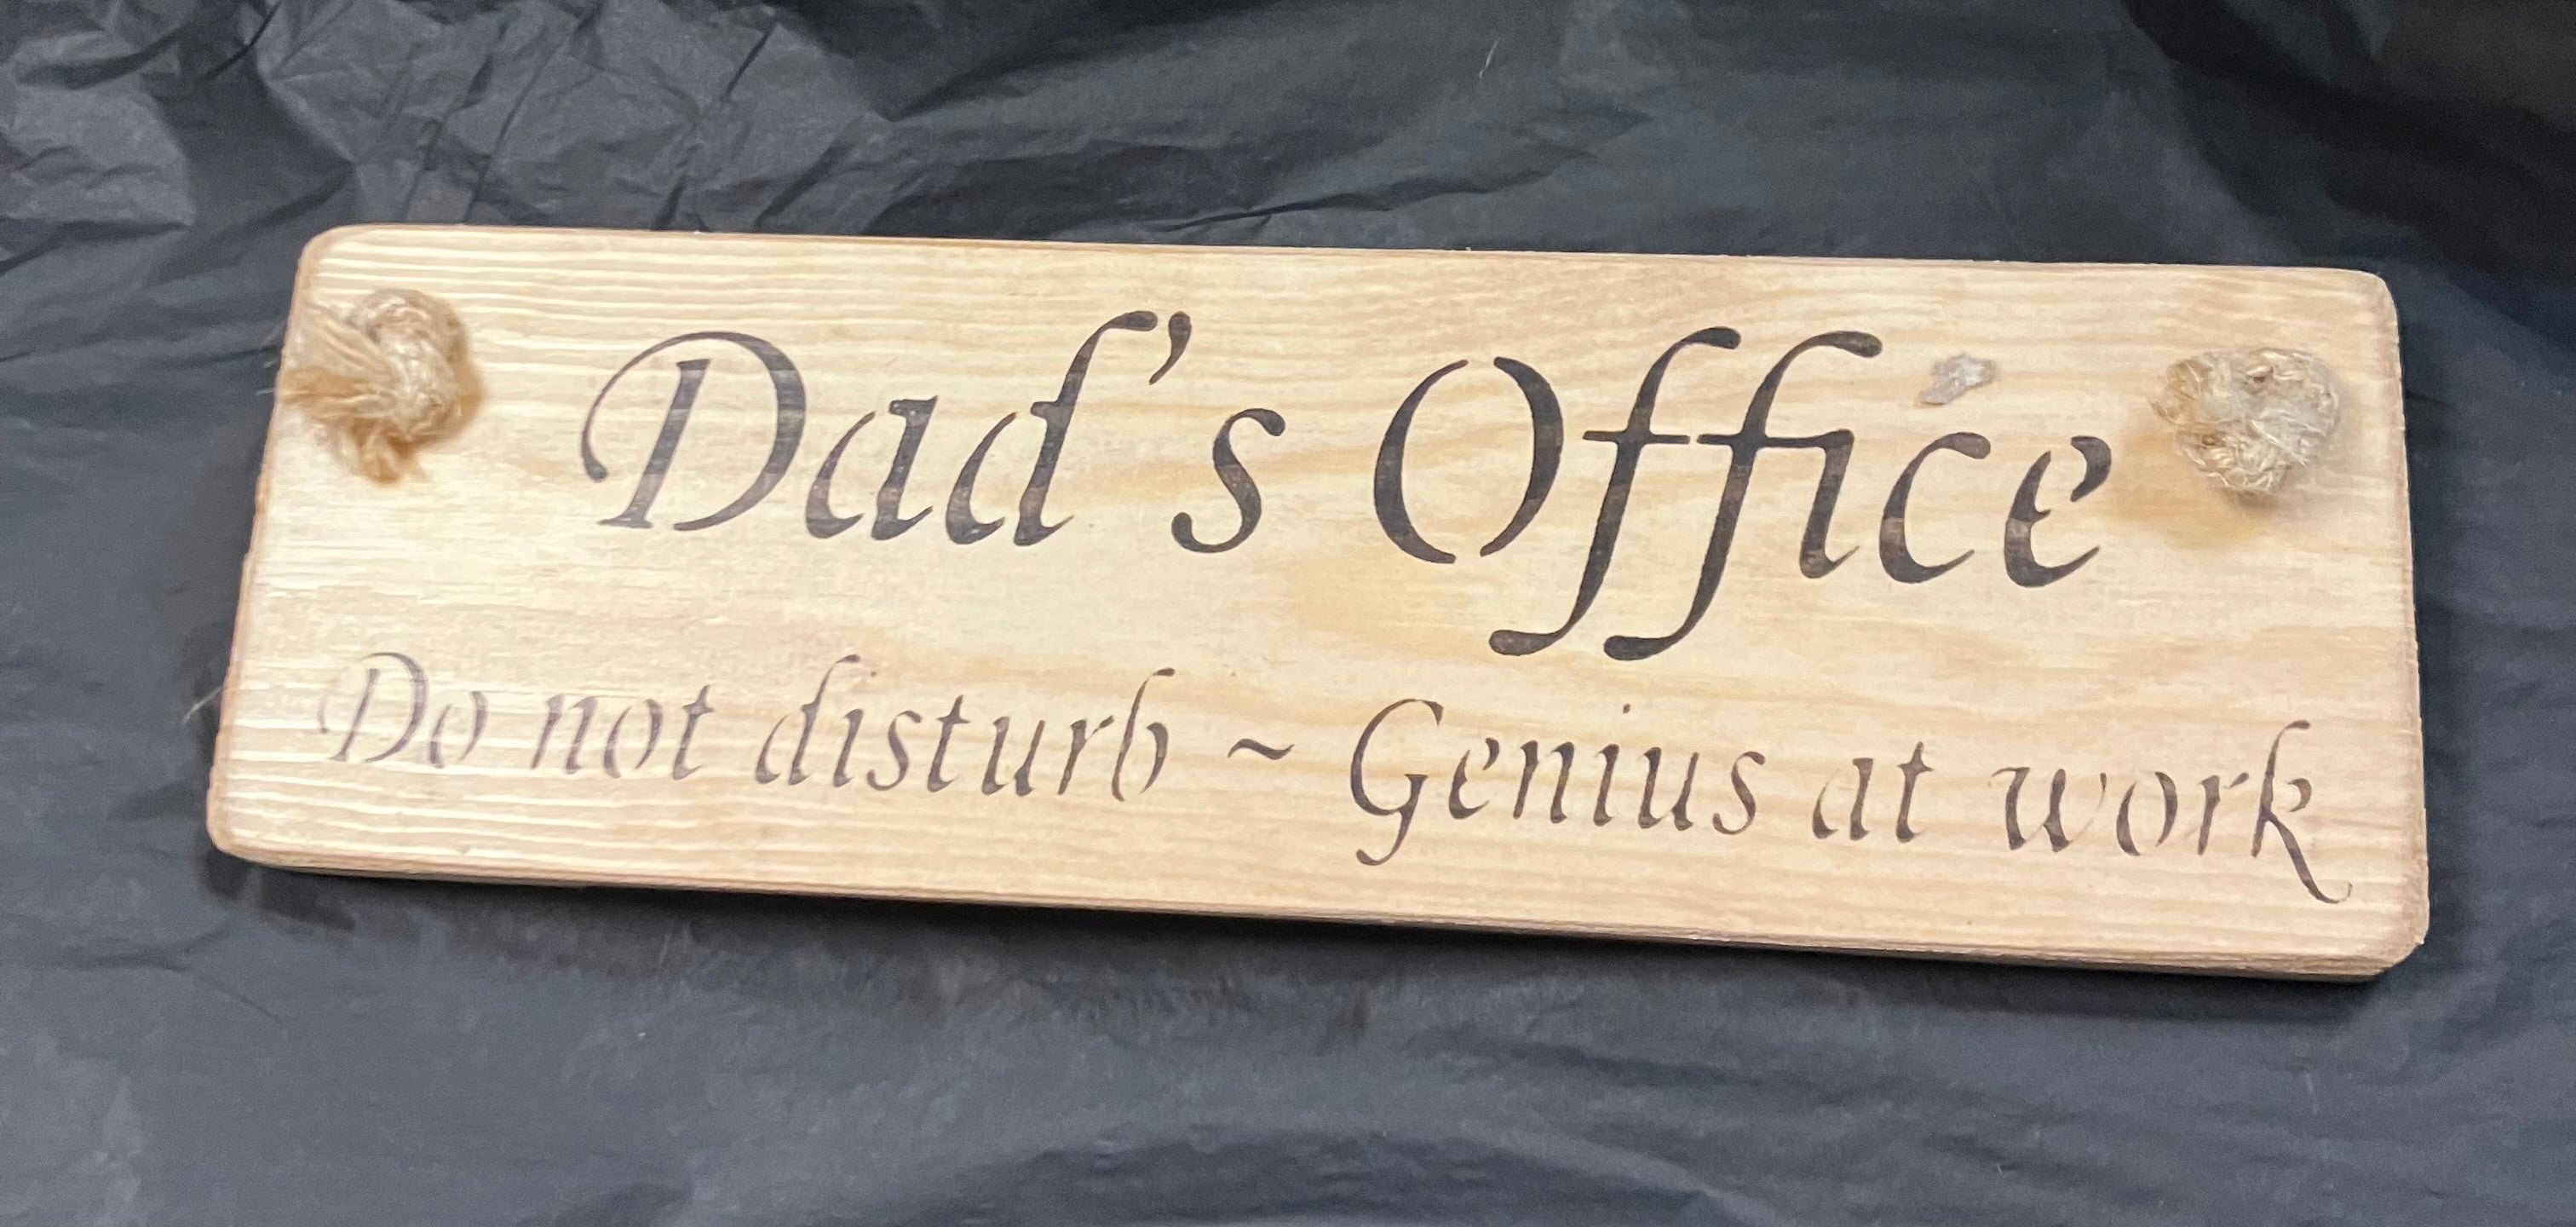 Dads Office Do not disturb - Genius at Work roped sign